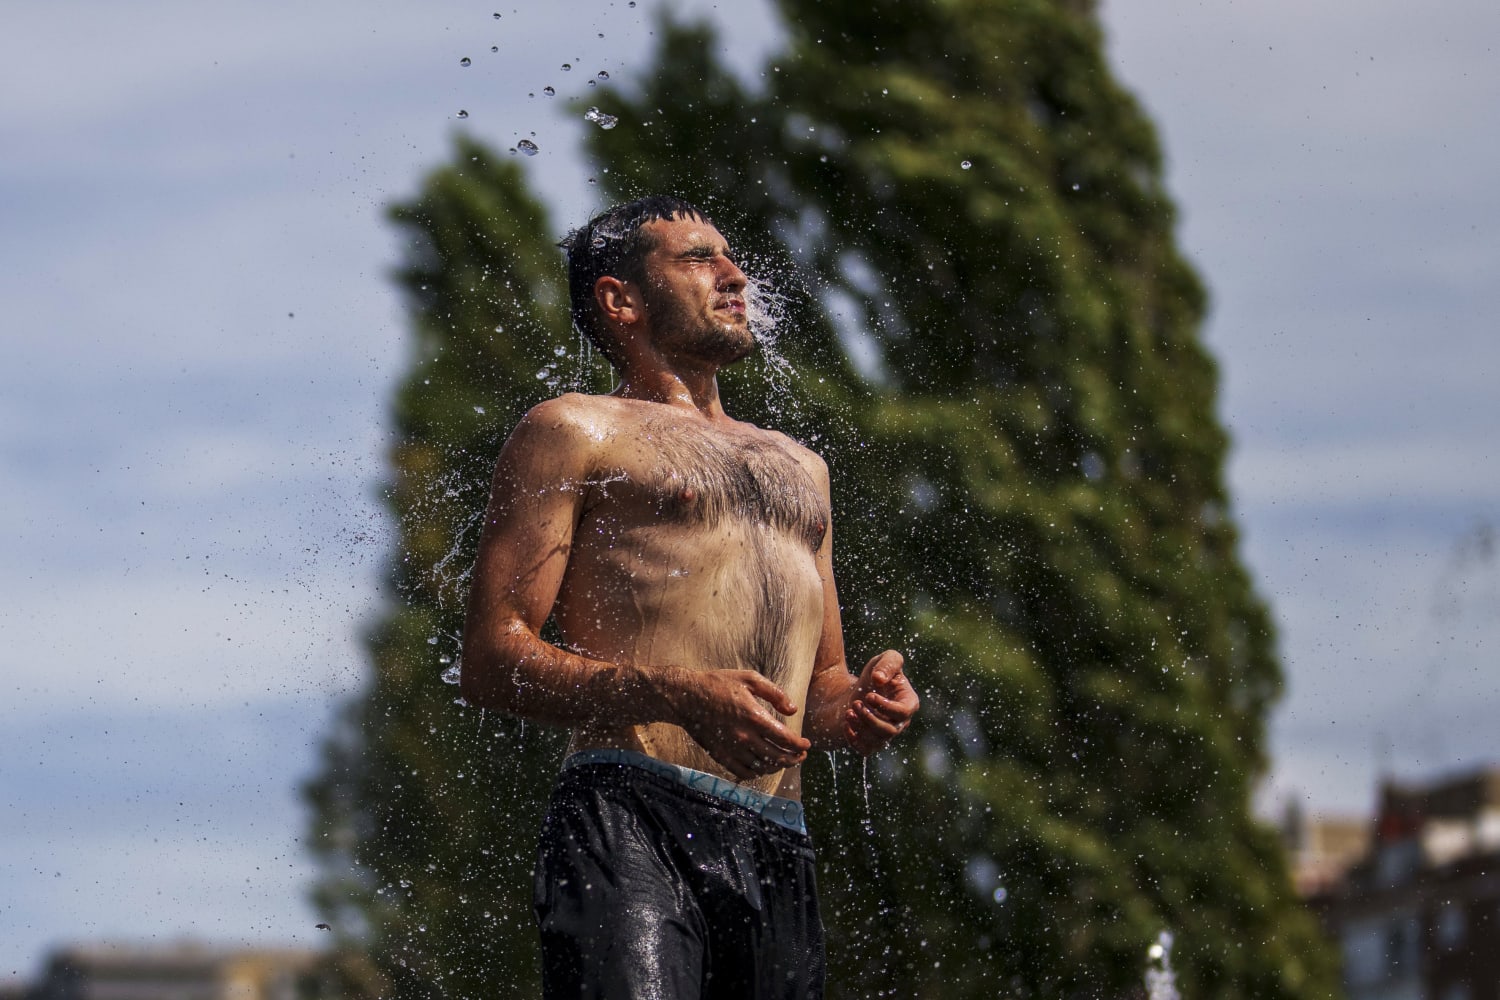 Southern Europe swelters as ‘Cerberus’ heatwave bites